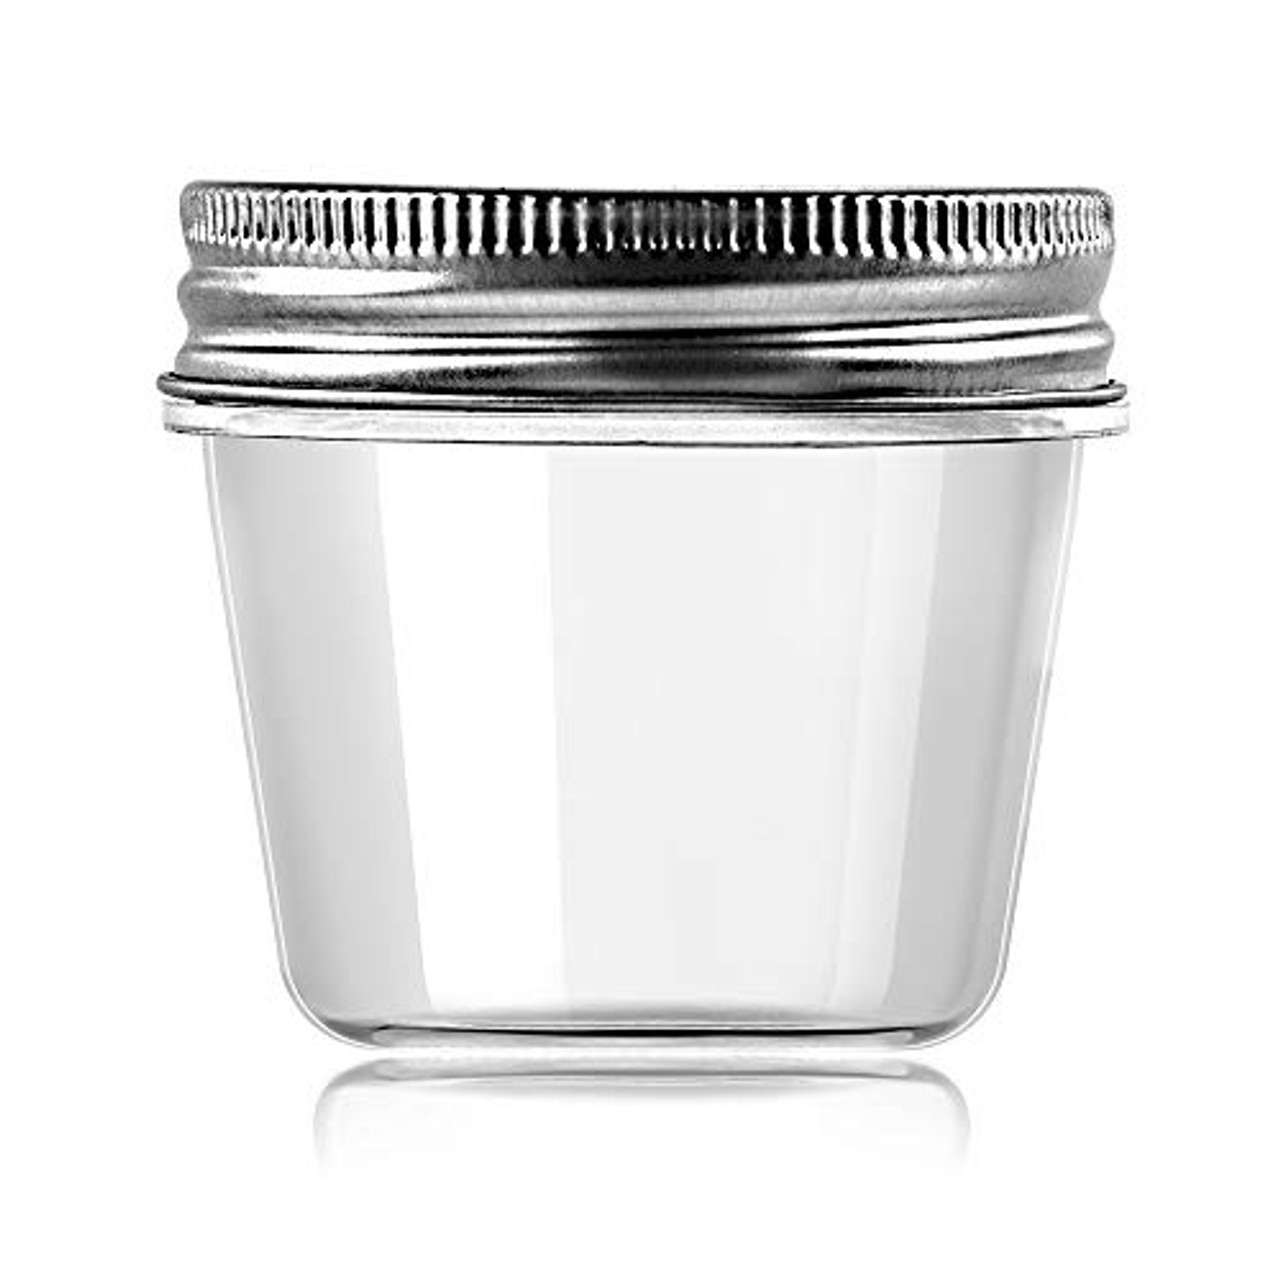 12 Pack Clear Plastic Jars Containers with Screw On Lids,Refillable  Wide-Mouth Plastic Slime Storage Containers for Beauty Products,Kitchen &  Household Storage - BPA Free (2.8 Ounce)